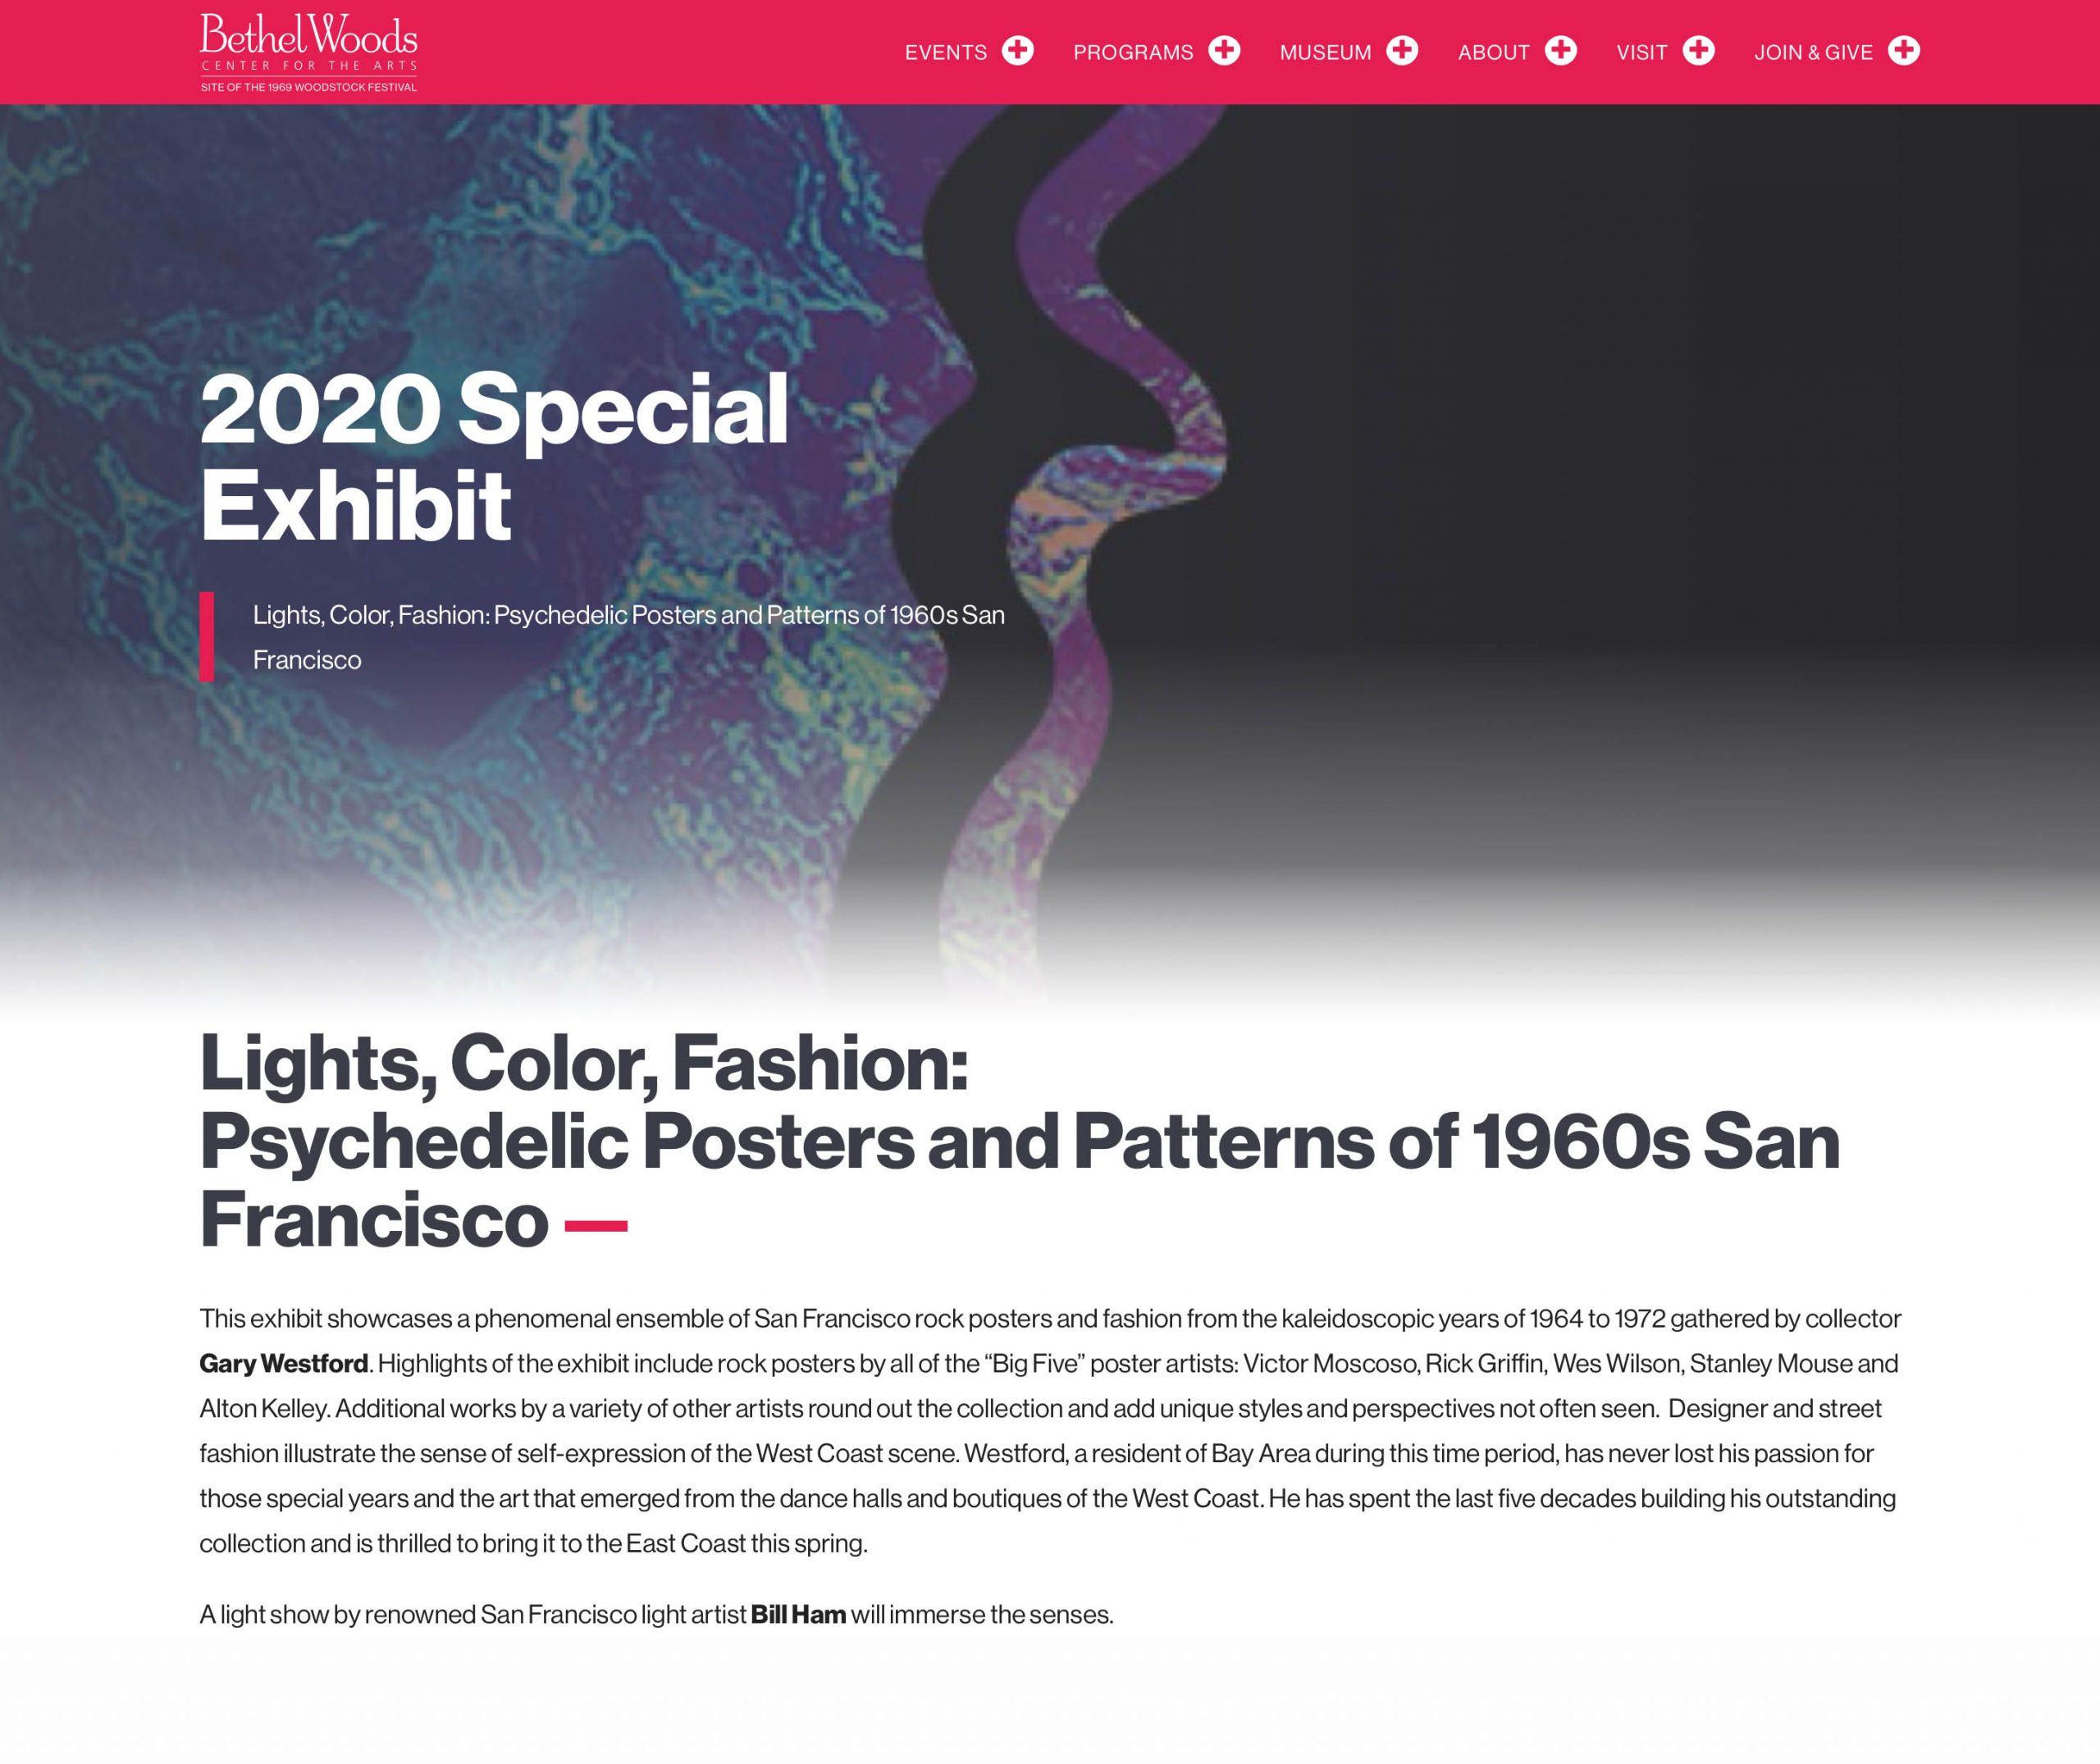 2020 Special Exhibit: Lights, Color, Fashion: Psychedelic Posters and Patterns of 1960s San Francisco at Bethel Woods Center for the Arts